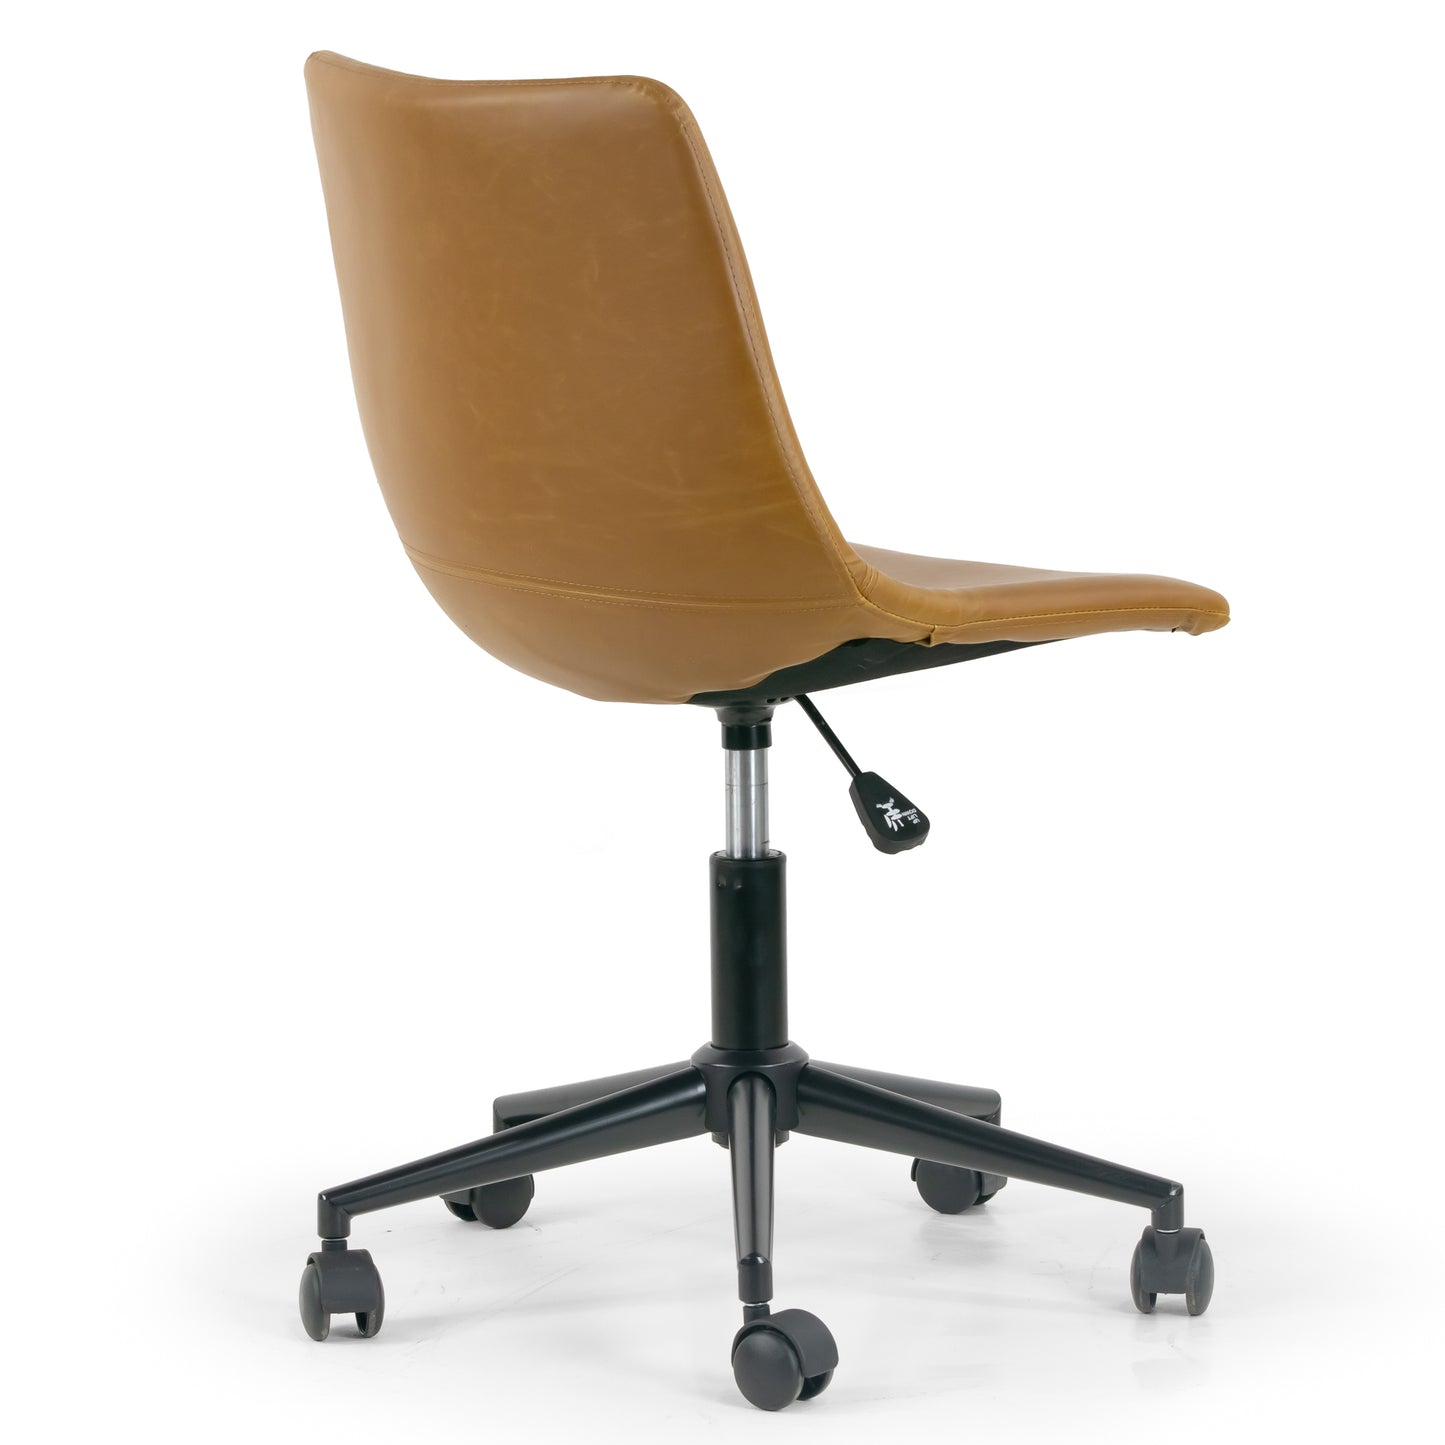 Adan Light Brown Faux Leather Adjustable Height Swivel Office Chair with Wheel Base